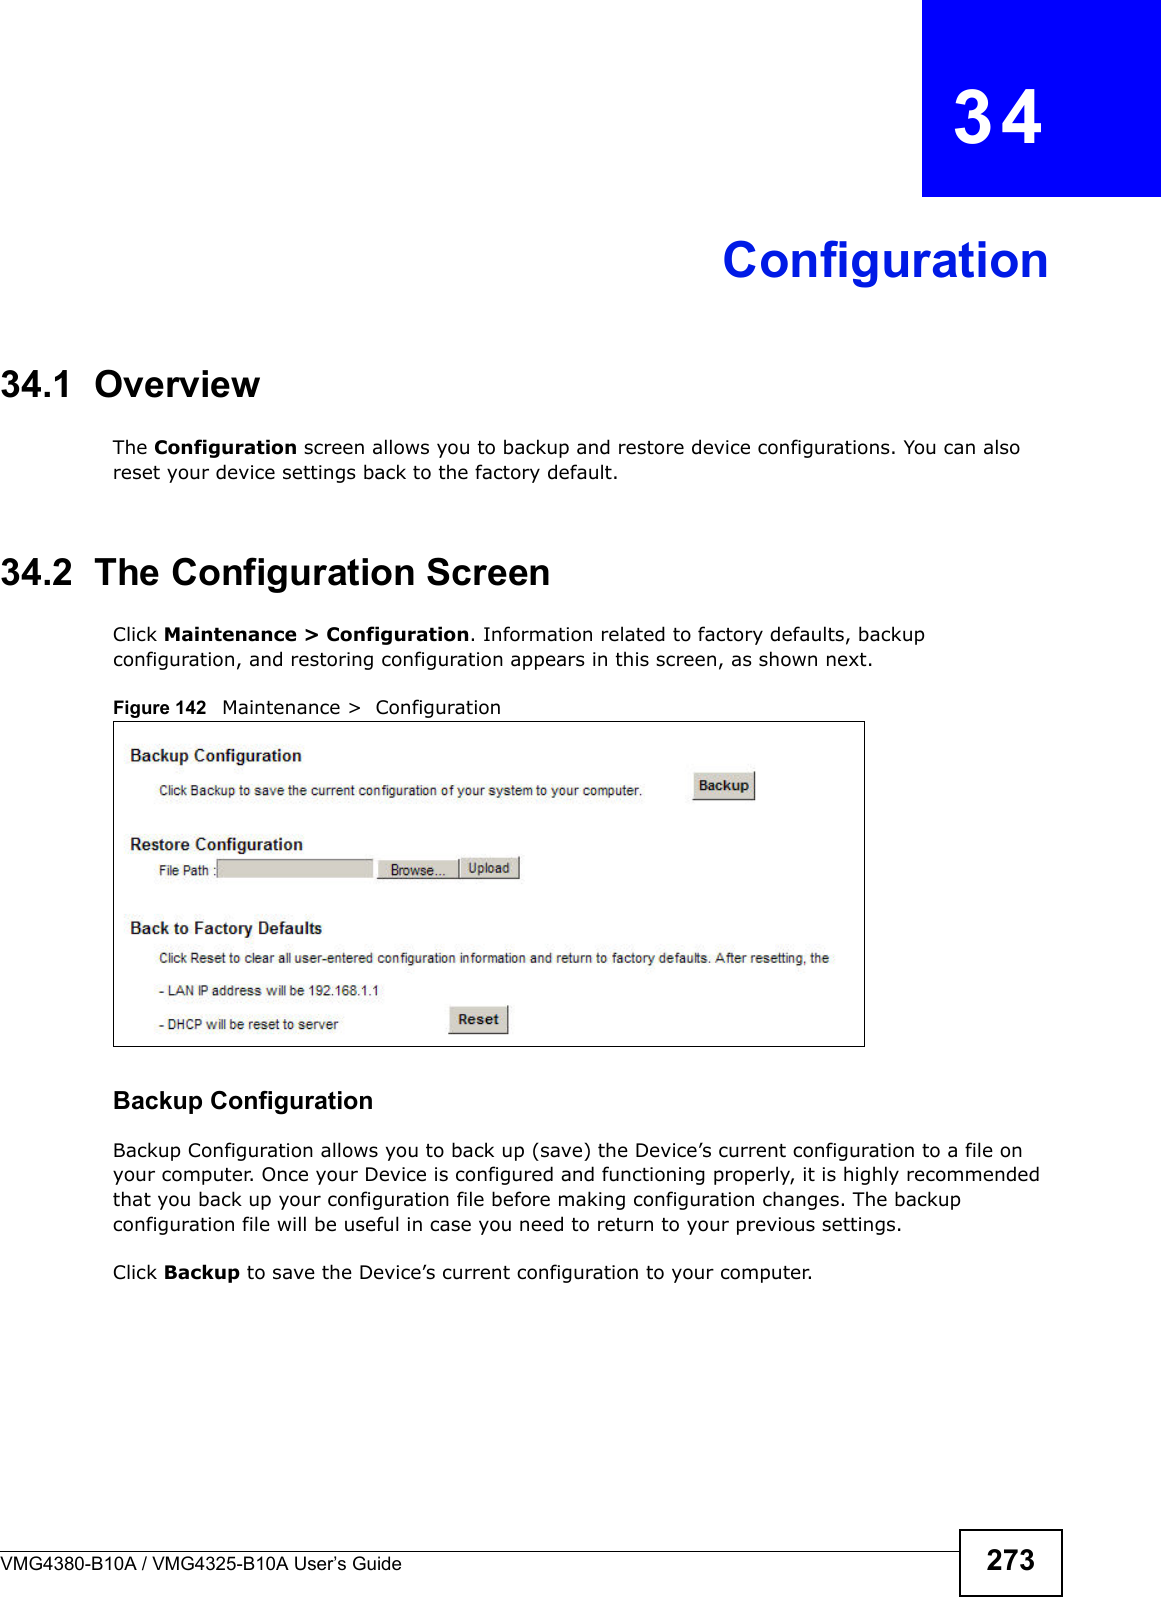 VMG4380-B10A / VMG4325-B10A User’s Guide 273CHAPTER  34Configuration34.1  OverviewThe Configuration screen allows you to backup and restore device configurations. You can also reset your device settings back to the factory default.34.2  The Configuration Screen Click Maintenance &gt; Configuration. Information related to factory defaults, backup configuration, and restoring configuration appears in this screen, as shown next.Figure 142   Maintenance &gt;  ConfigurationBackup Configuration Backup Configuration allows you to back up (save) the Device’s current configuration to a file on your computer. Once your Device is configured and functioning properly, it is highly recommended that you back up your configuration file before making configuration changes. The backup configuration file will be useful in case you need to return to your previous settings. Click Backup to save the Device’s current configuration to your computer.